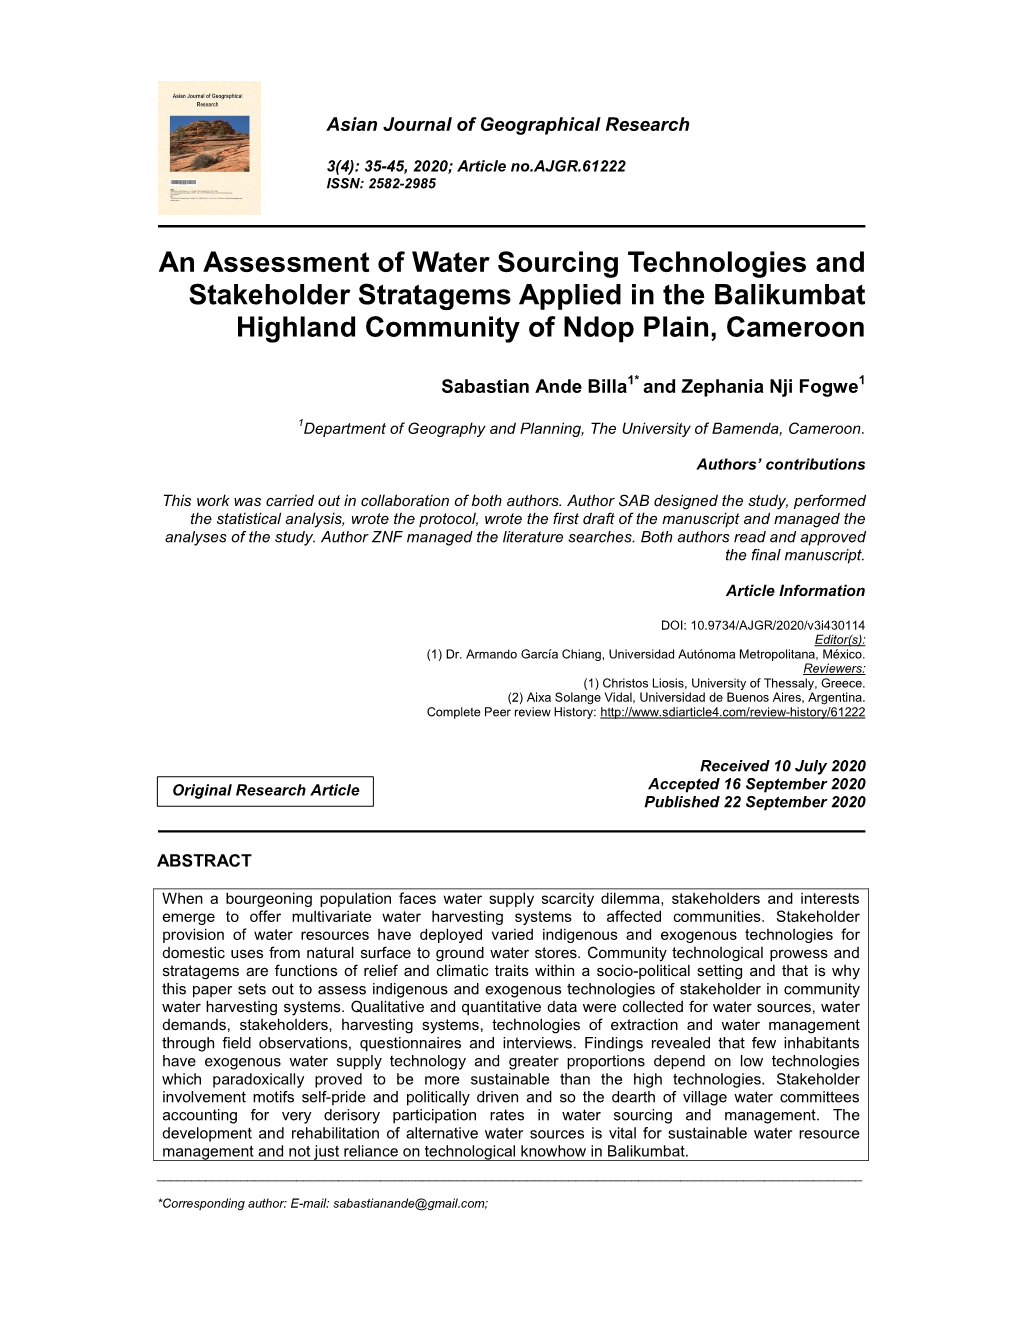 An Assessment of Water Sourcing Technologies and Stakeholder Stratagems Applied in the Balikumbat Highland Community of Ndop Plain, Cameroon